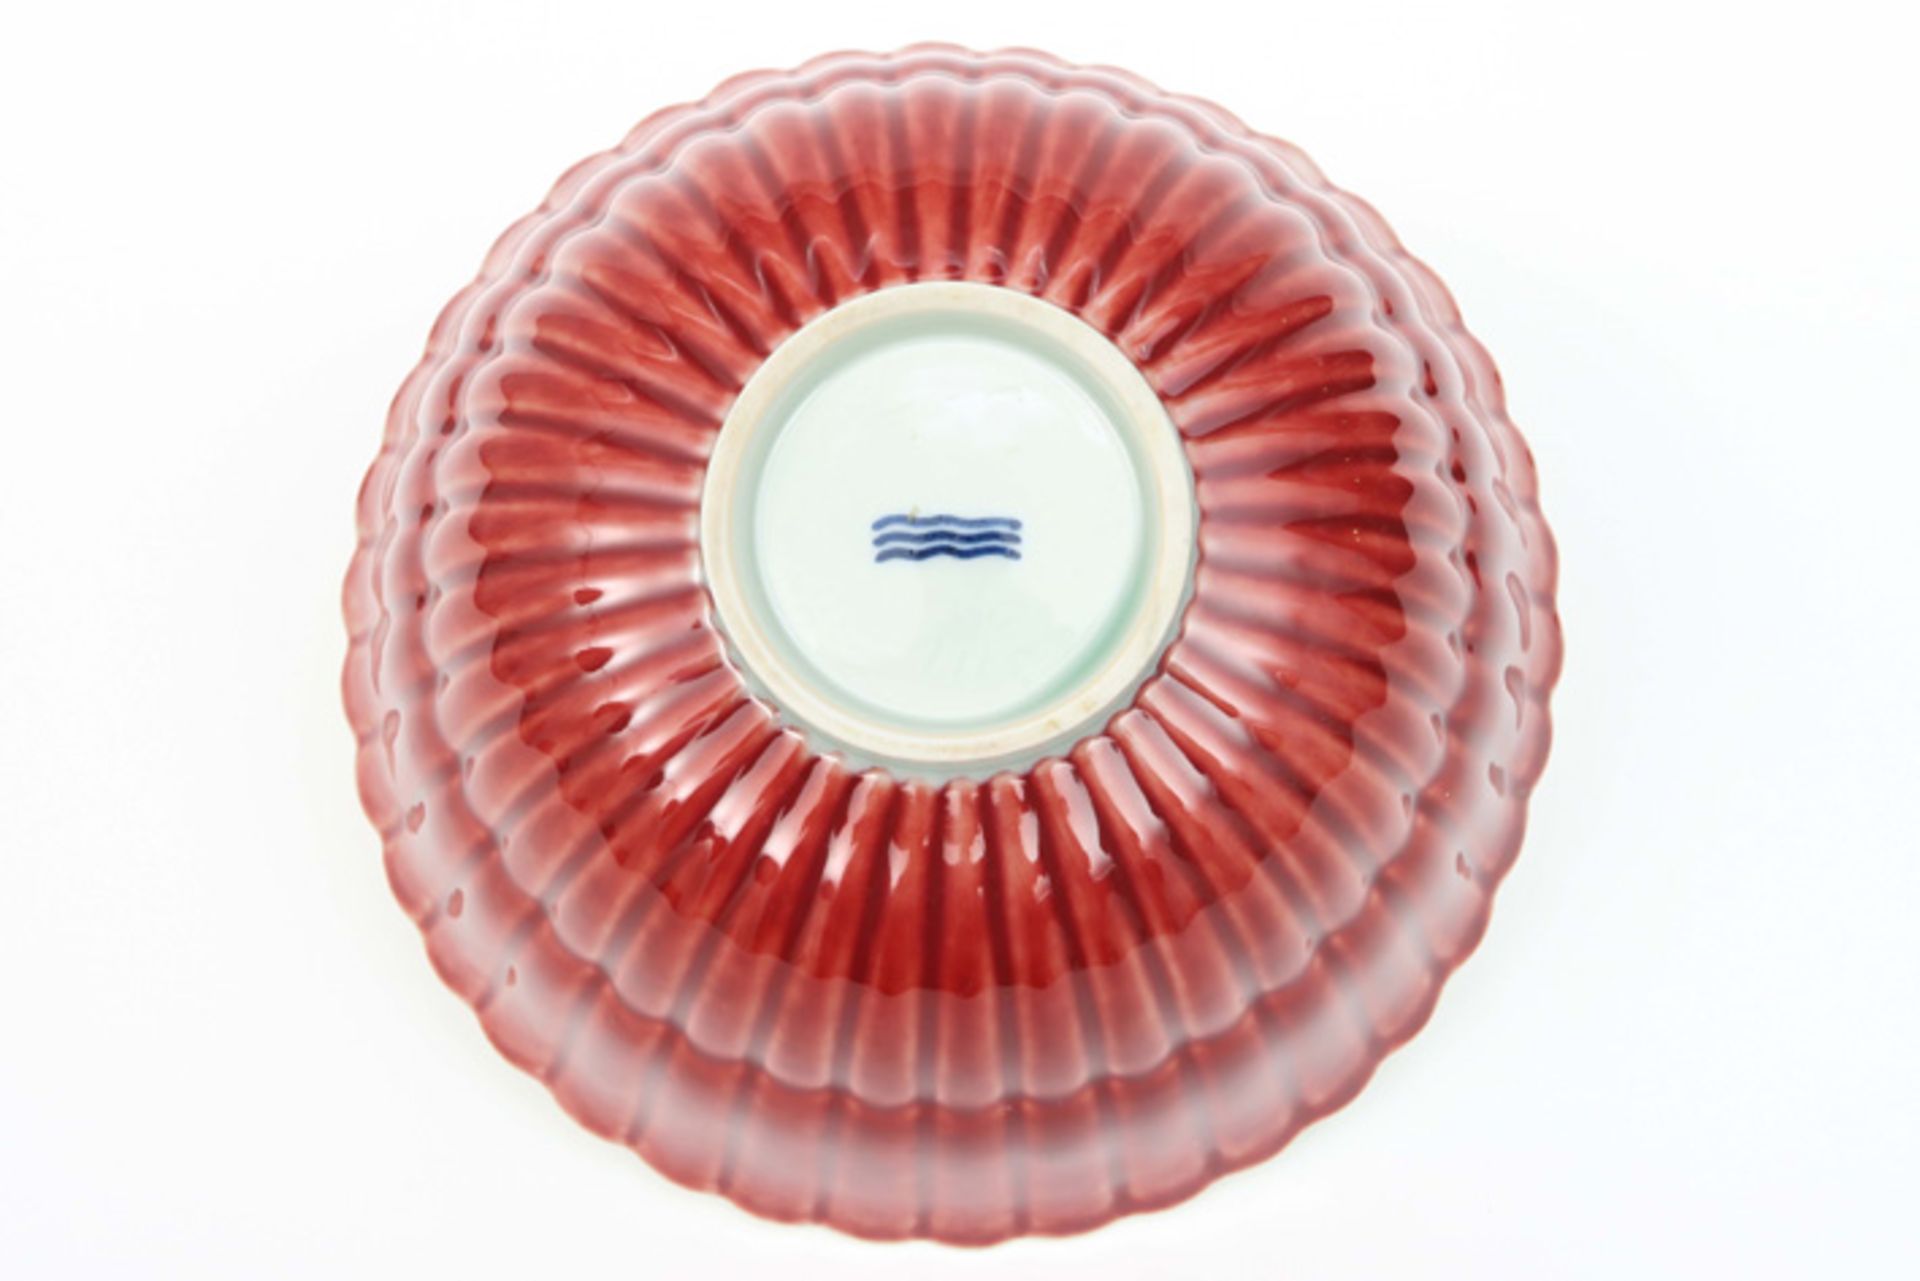 scalloped lotusflower shaped bowl in marked Royal Kopenhagen porcelain with embossed ribs||Bowl in - Image 4 of 5